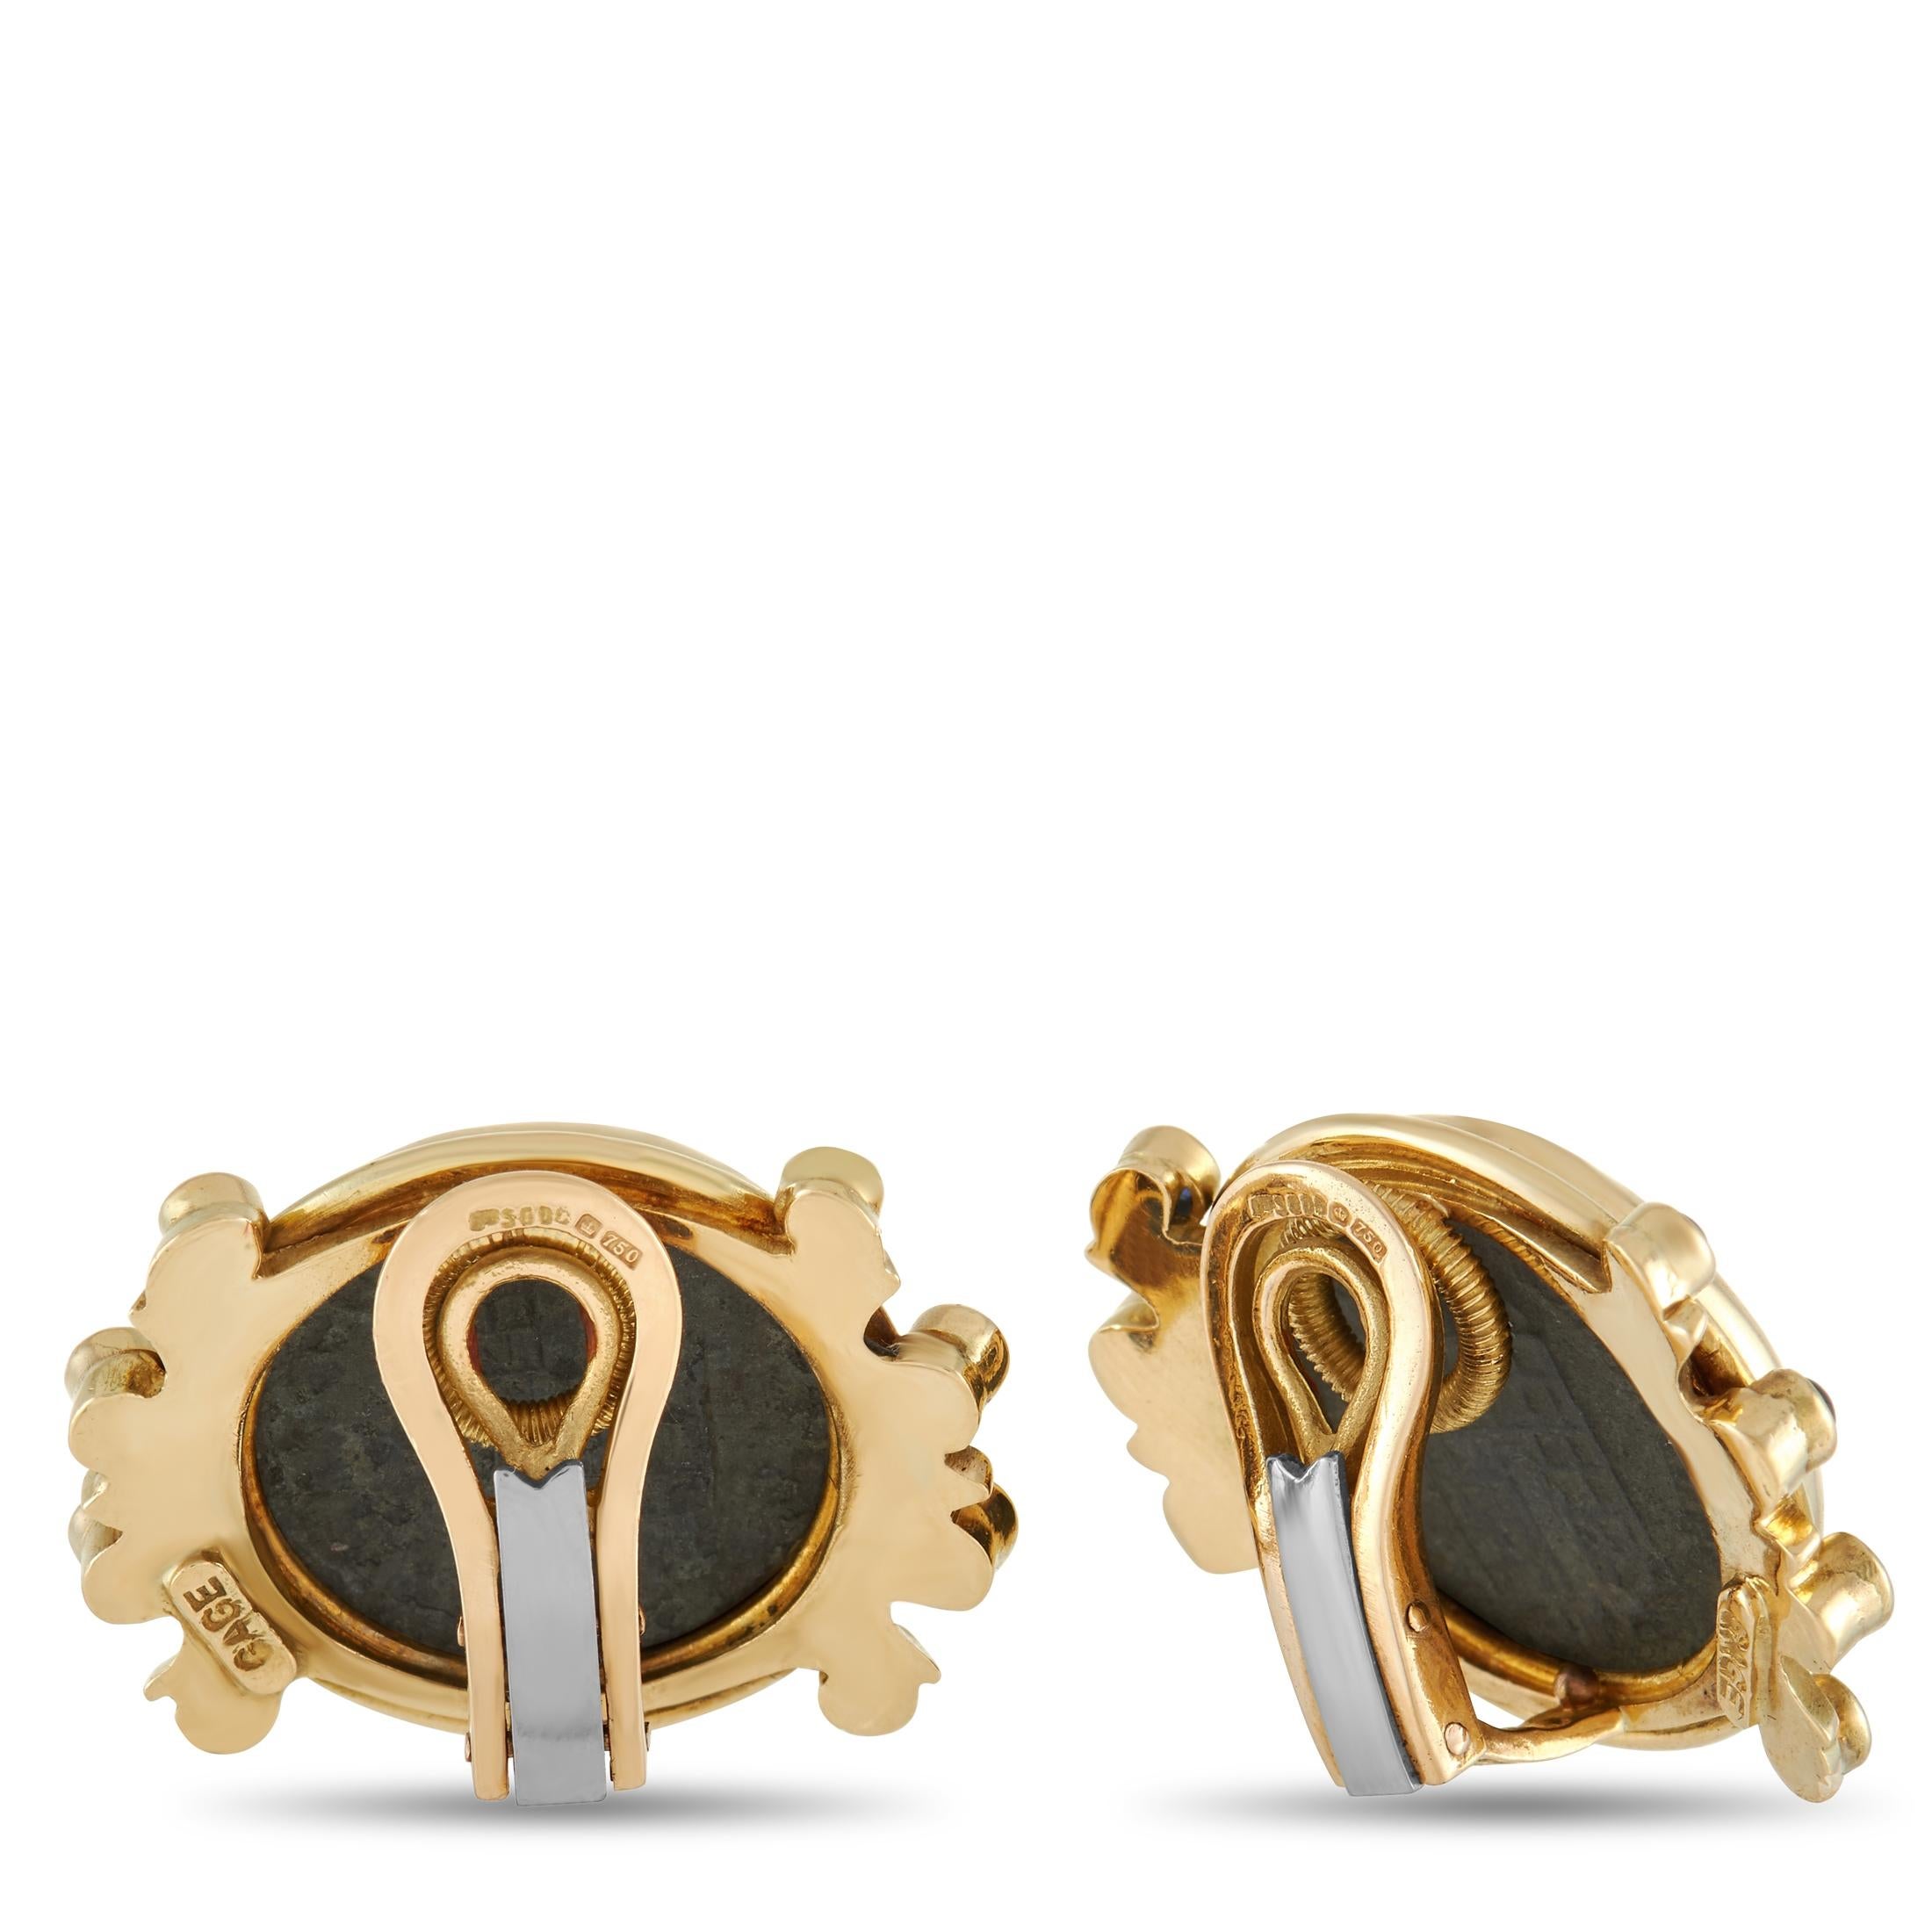 You’ve never seen anything quite like these exquisitely styled earrings from Elizabeth Gage. Set within an 18K Yellow Gold bezel setting, you’ll find authentic bronze coins that hail from ancient Rome, circa 325 AD. Each one measures .75” wide, 1”